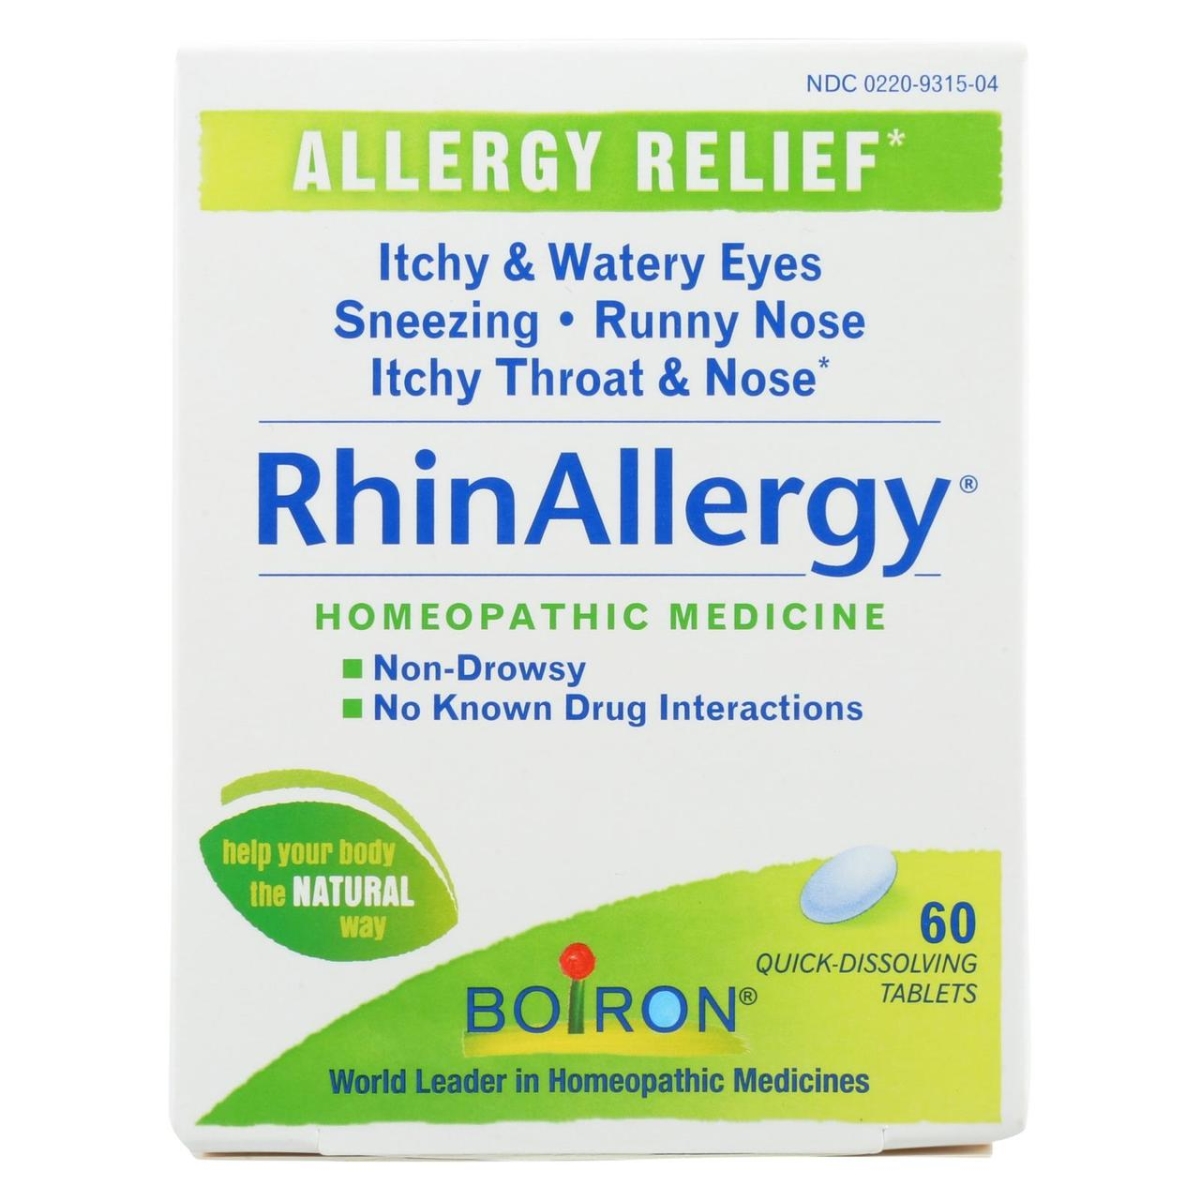 Picture of Boiron HG2314342 Rhinallergy Allergy Relief Homeopathic Medicine - 60 Tablets